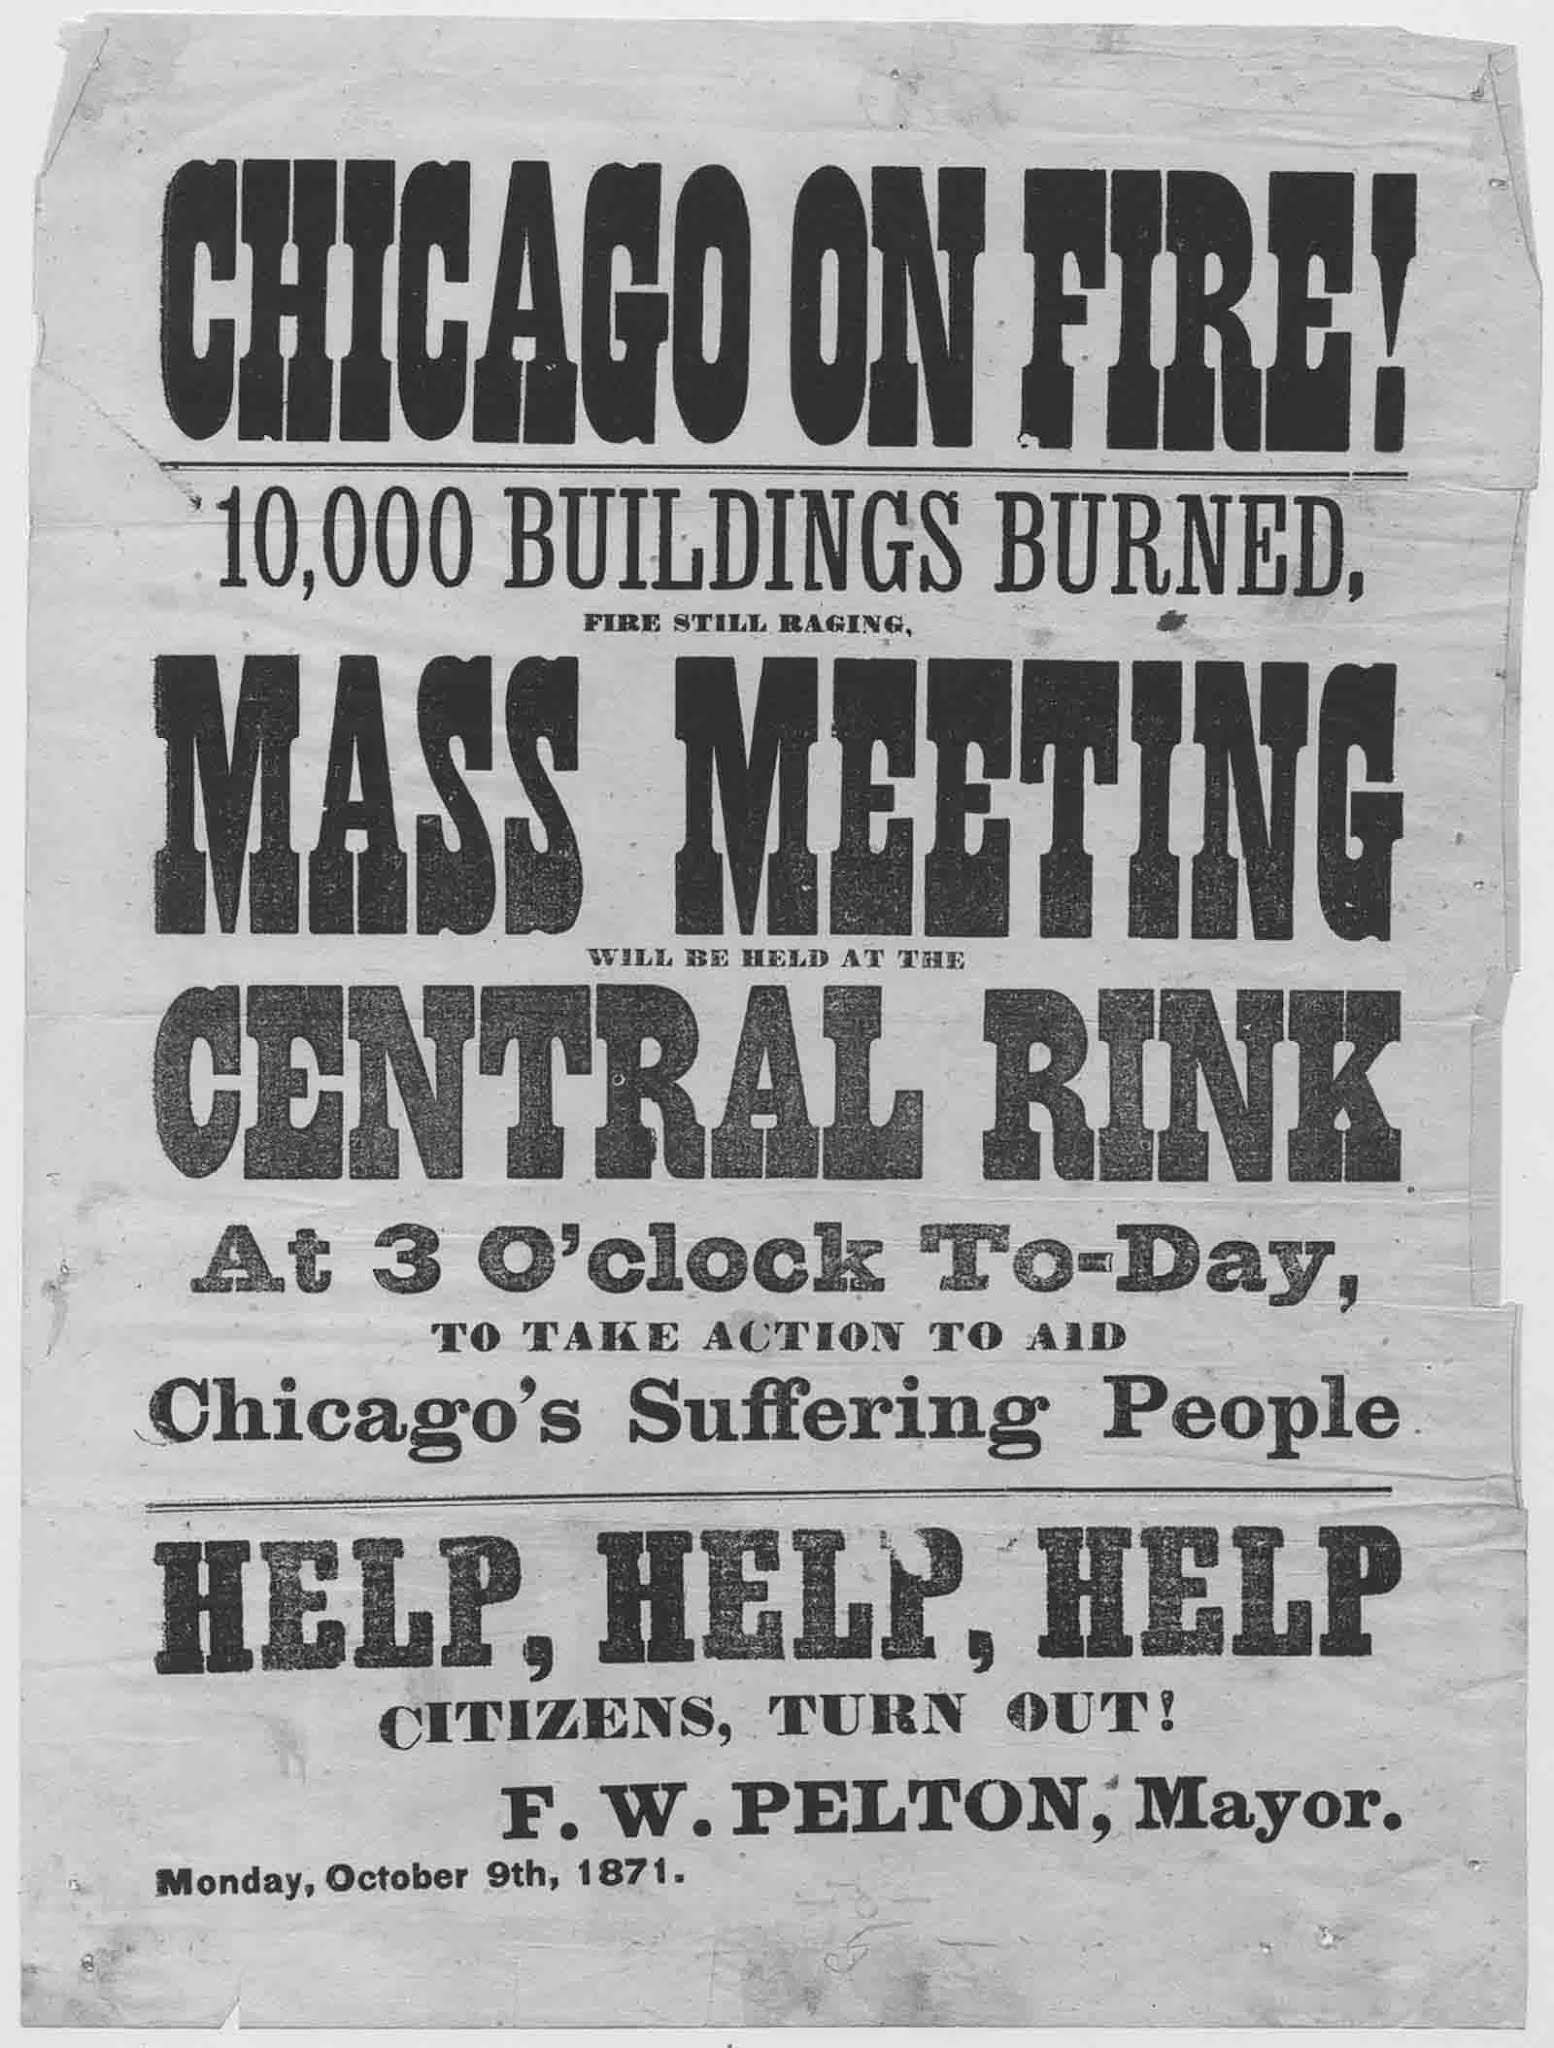 The Great Chicago Fire 1871: Historical Photos that Depict the Destruction caused by the Great Disaster